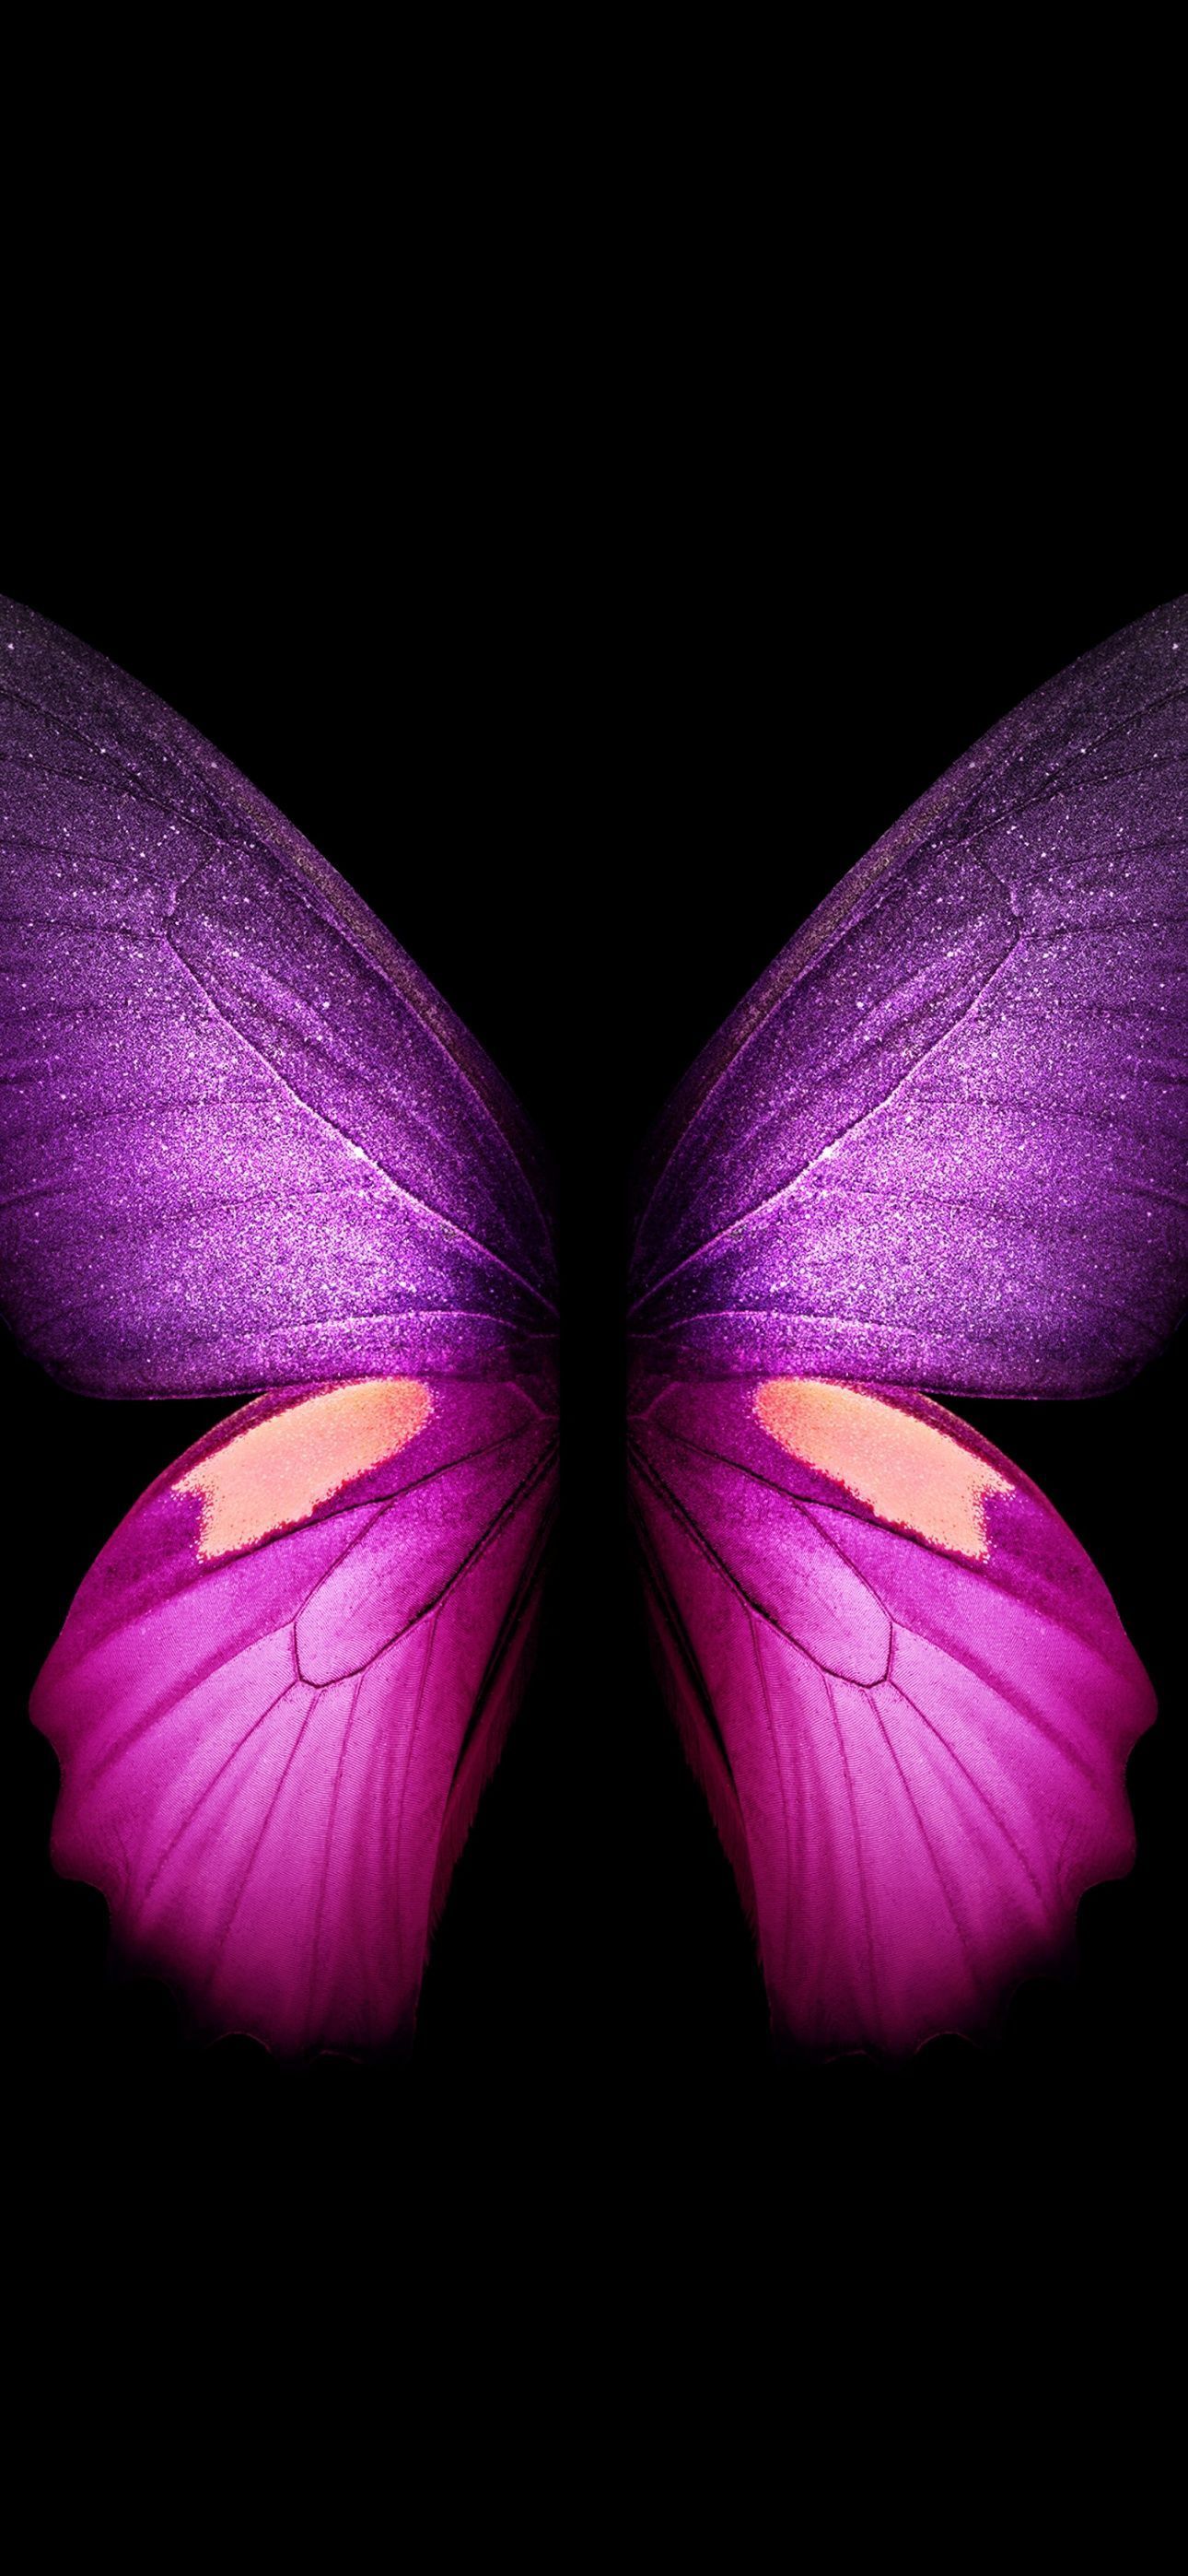 Samsung Galaxy Fold wallpaper with a pink butterfly on a black background - Wings